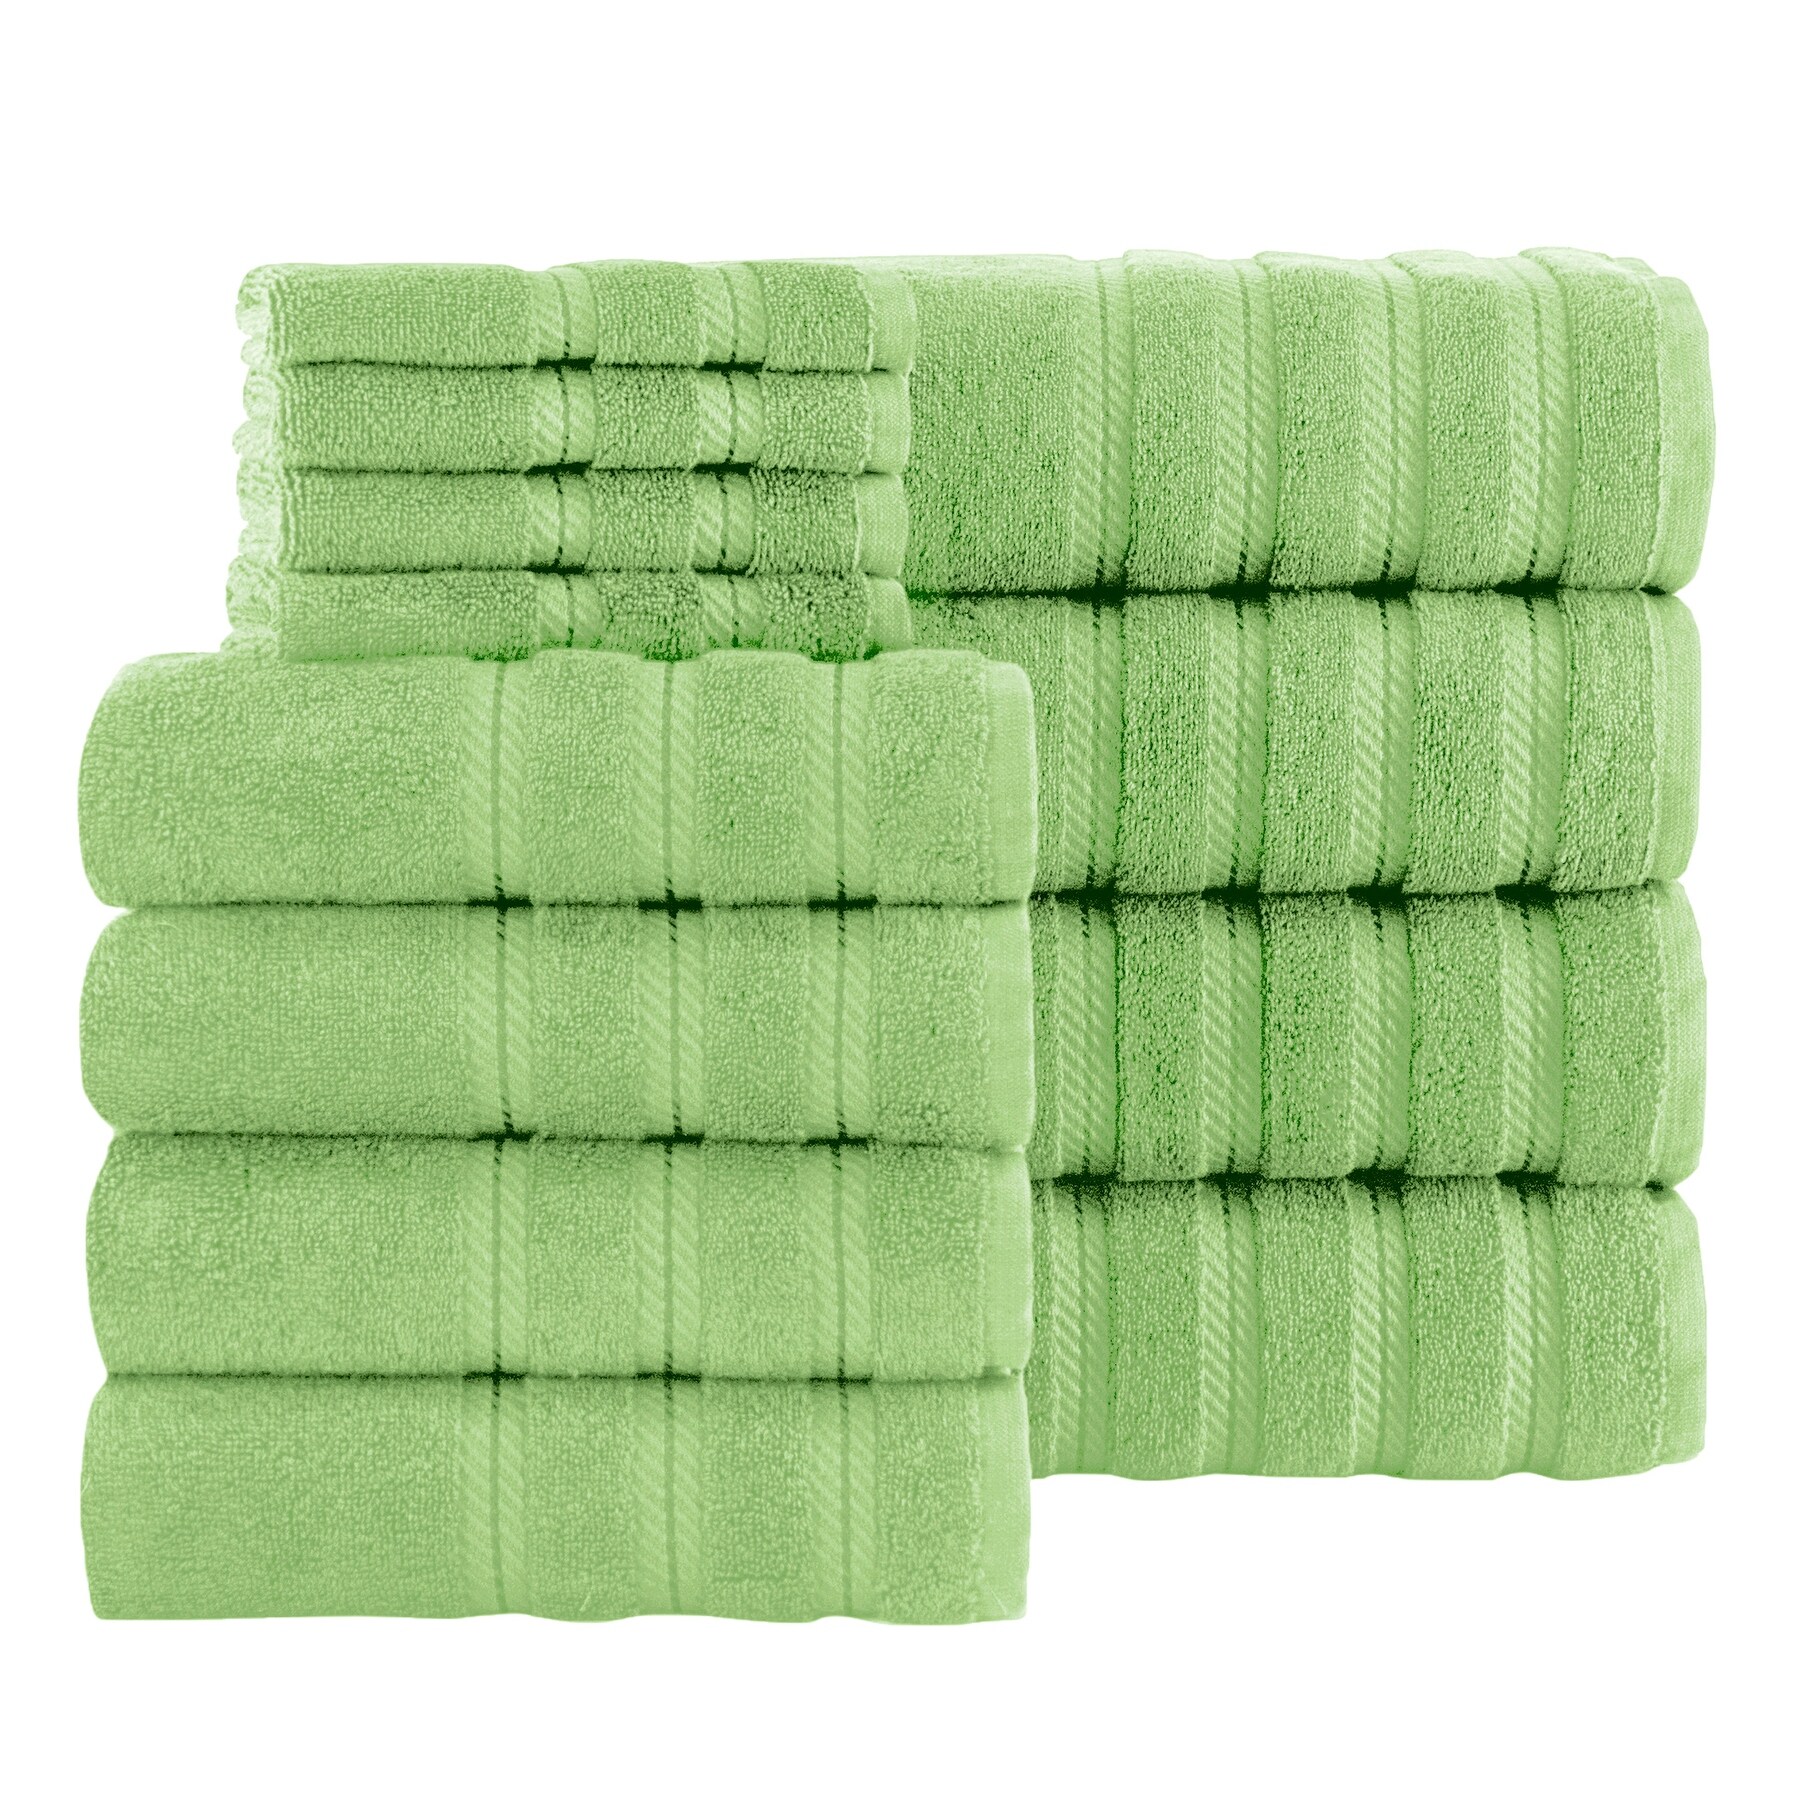 https://ak1.ostkcdn.com/images/products/is/images/direct/f02ca75f36cdee4302cab871f43be49852ea8208/Antalya-Collection-Turkish-Cotton-Bathroom-Towel-Set---Hotel-Collection-Towel-Set-%28Set-of-12%29.jpg